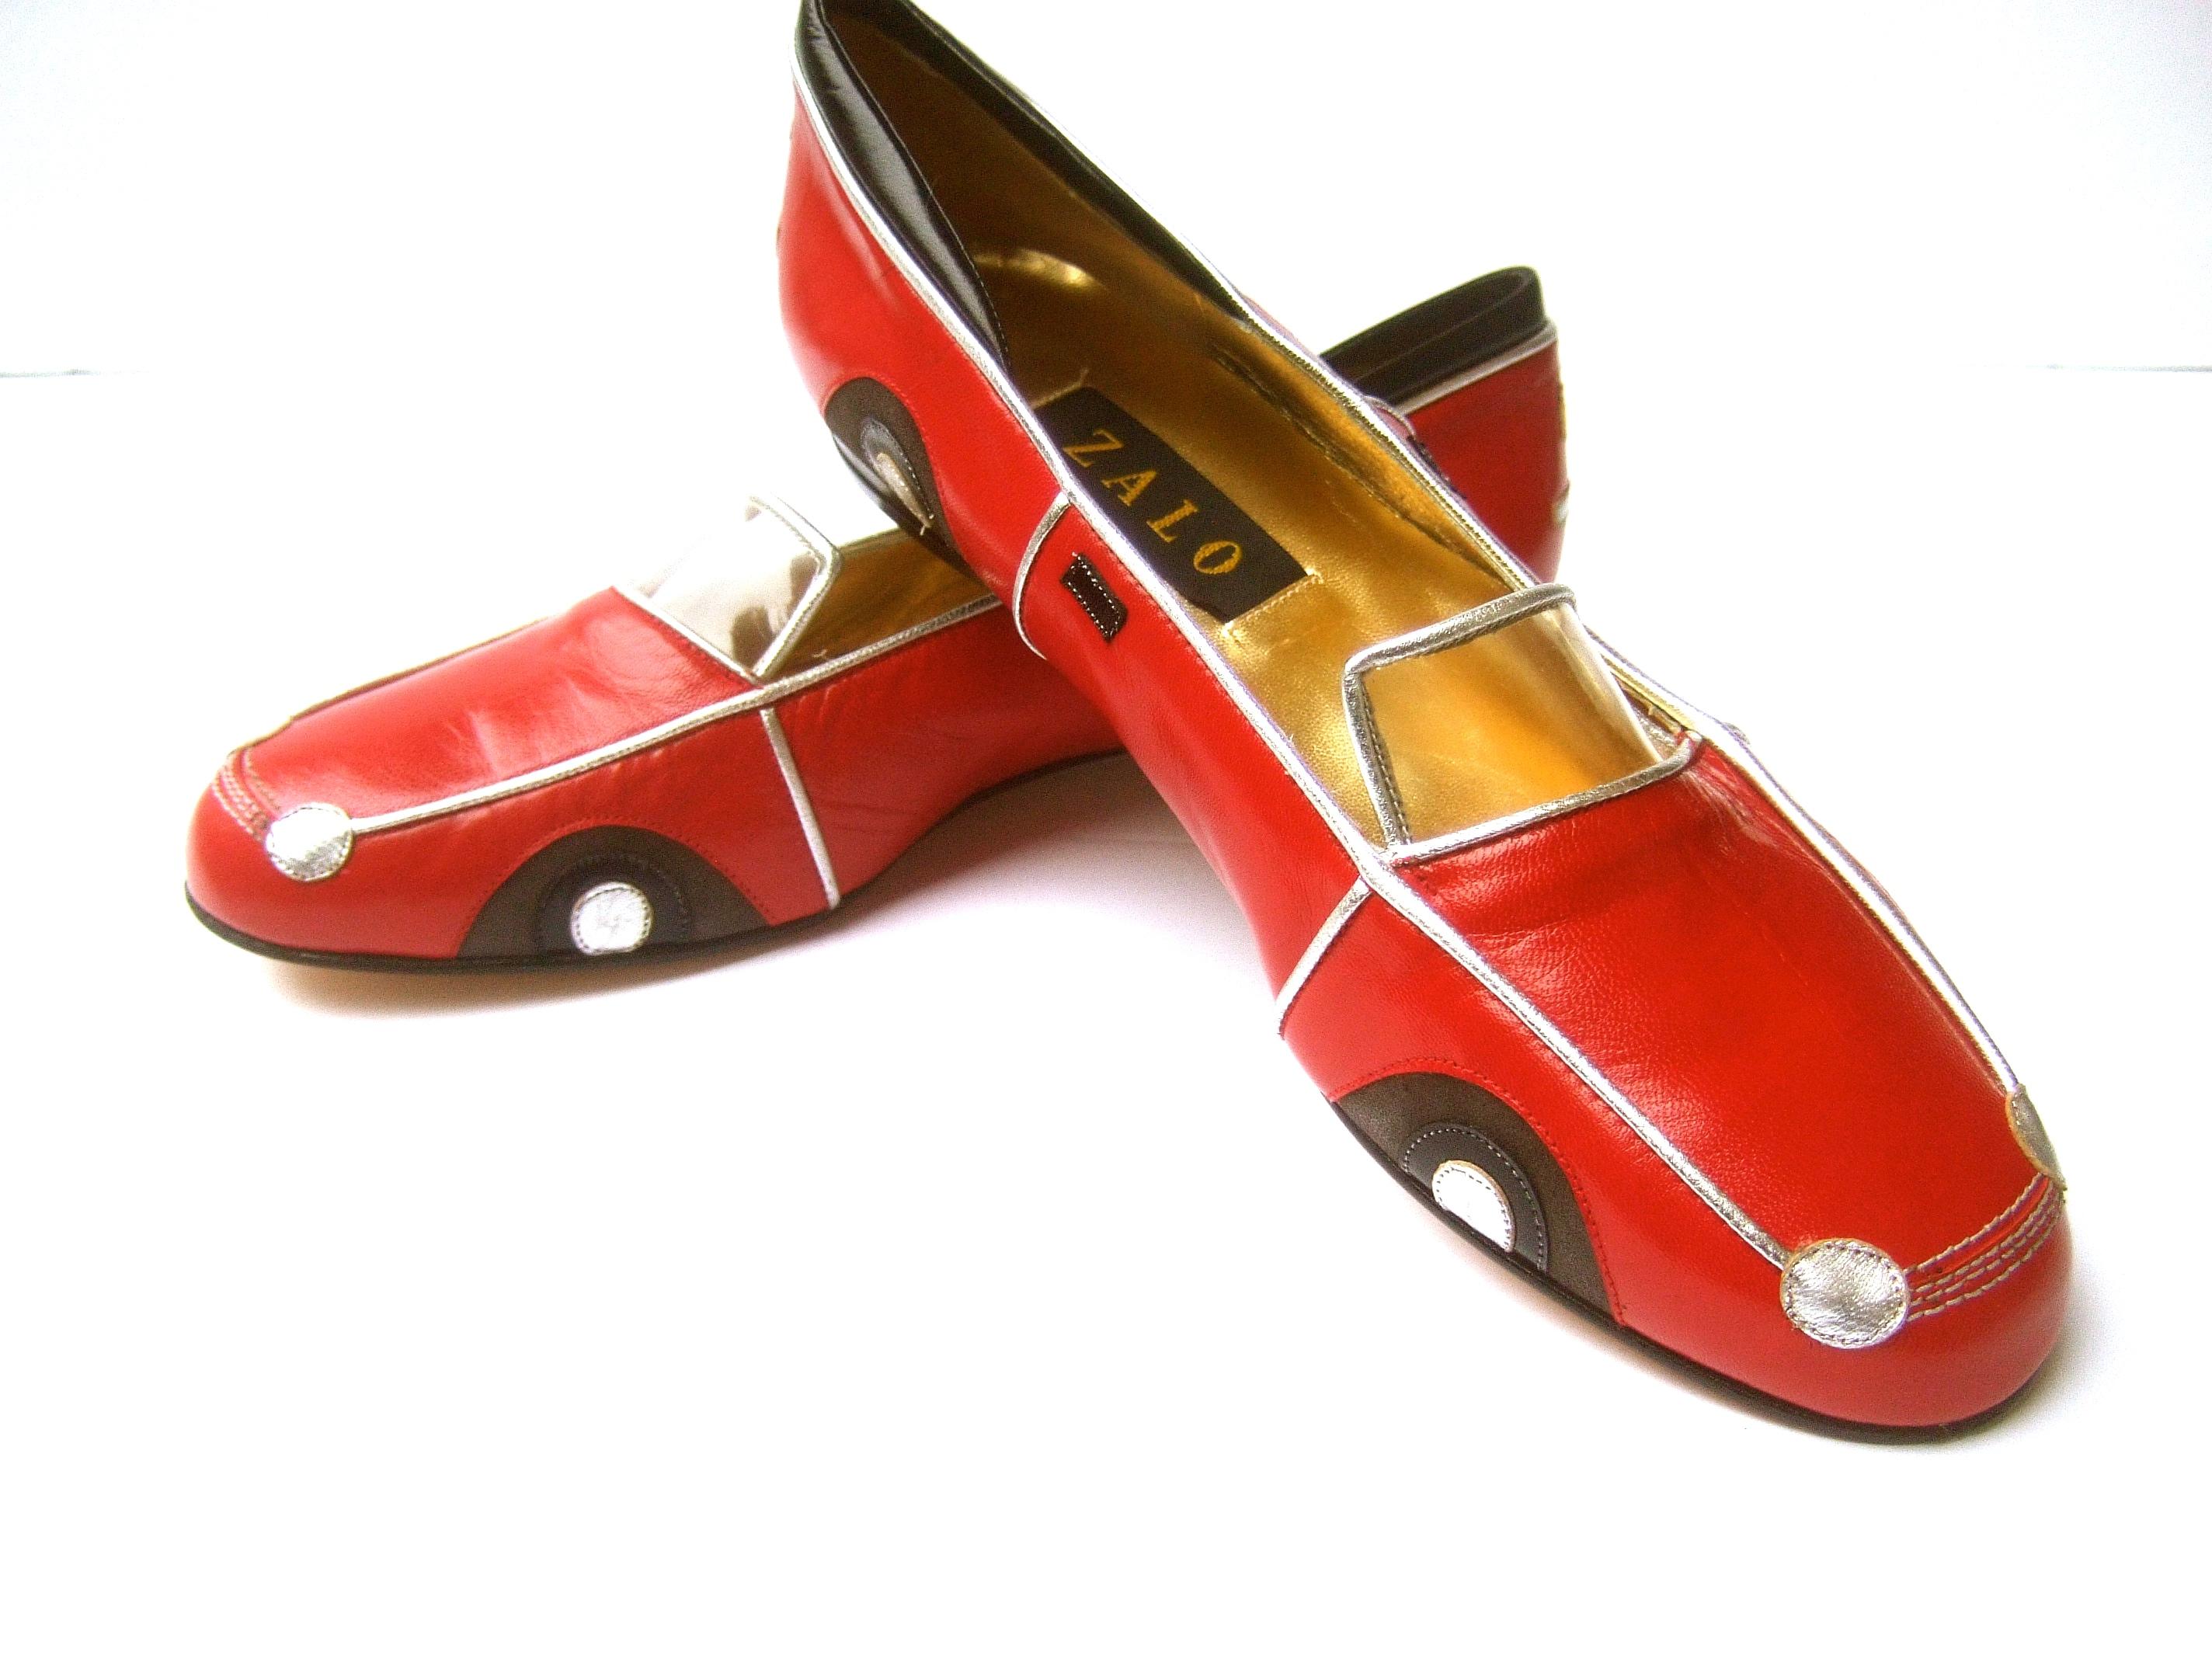 Whimsical red leather sports car design shoes by Zalo US SIze 9 M 
The charming car theme flats are constructed with smooth red leather
Accented with silver leather piping trim; silver headlights and hubcaps 
The windshield is designed with a clear